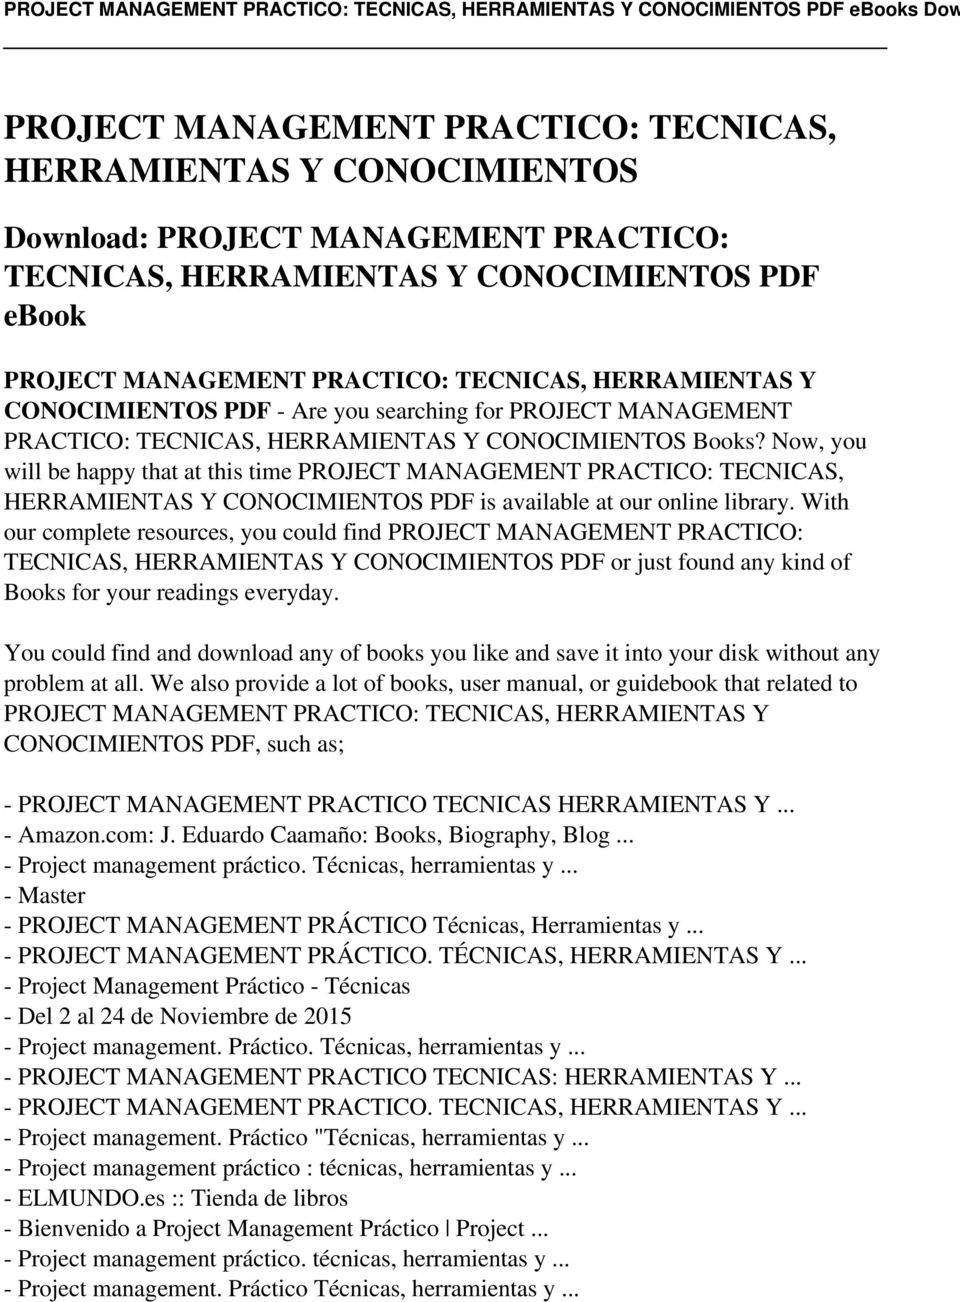 Now, you will be happy that at this time PROJECT MANAGEMENT PRACTICO: TECNICAS, HERRAMIENTAS Y CONOCIMIENTOS PDF is available at our online library.